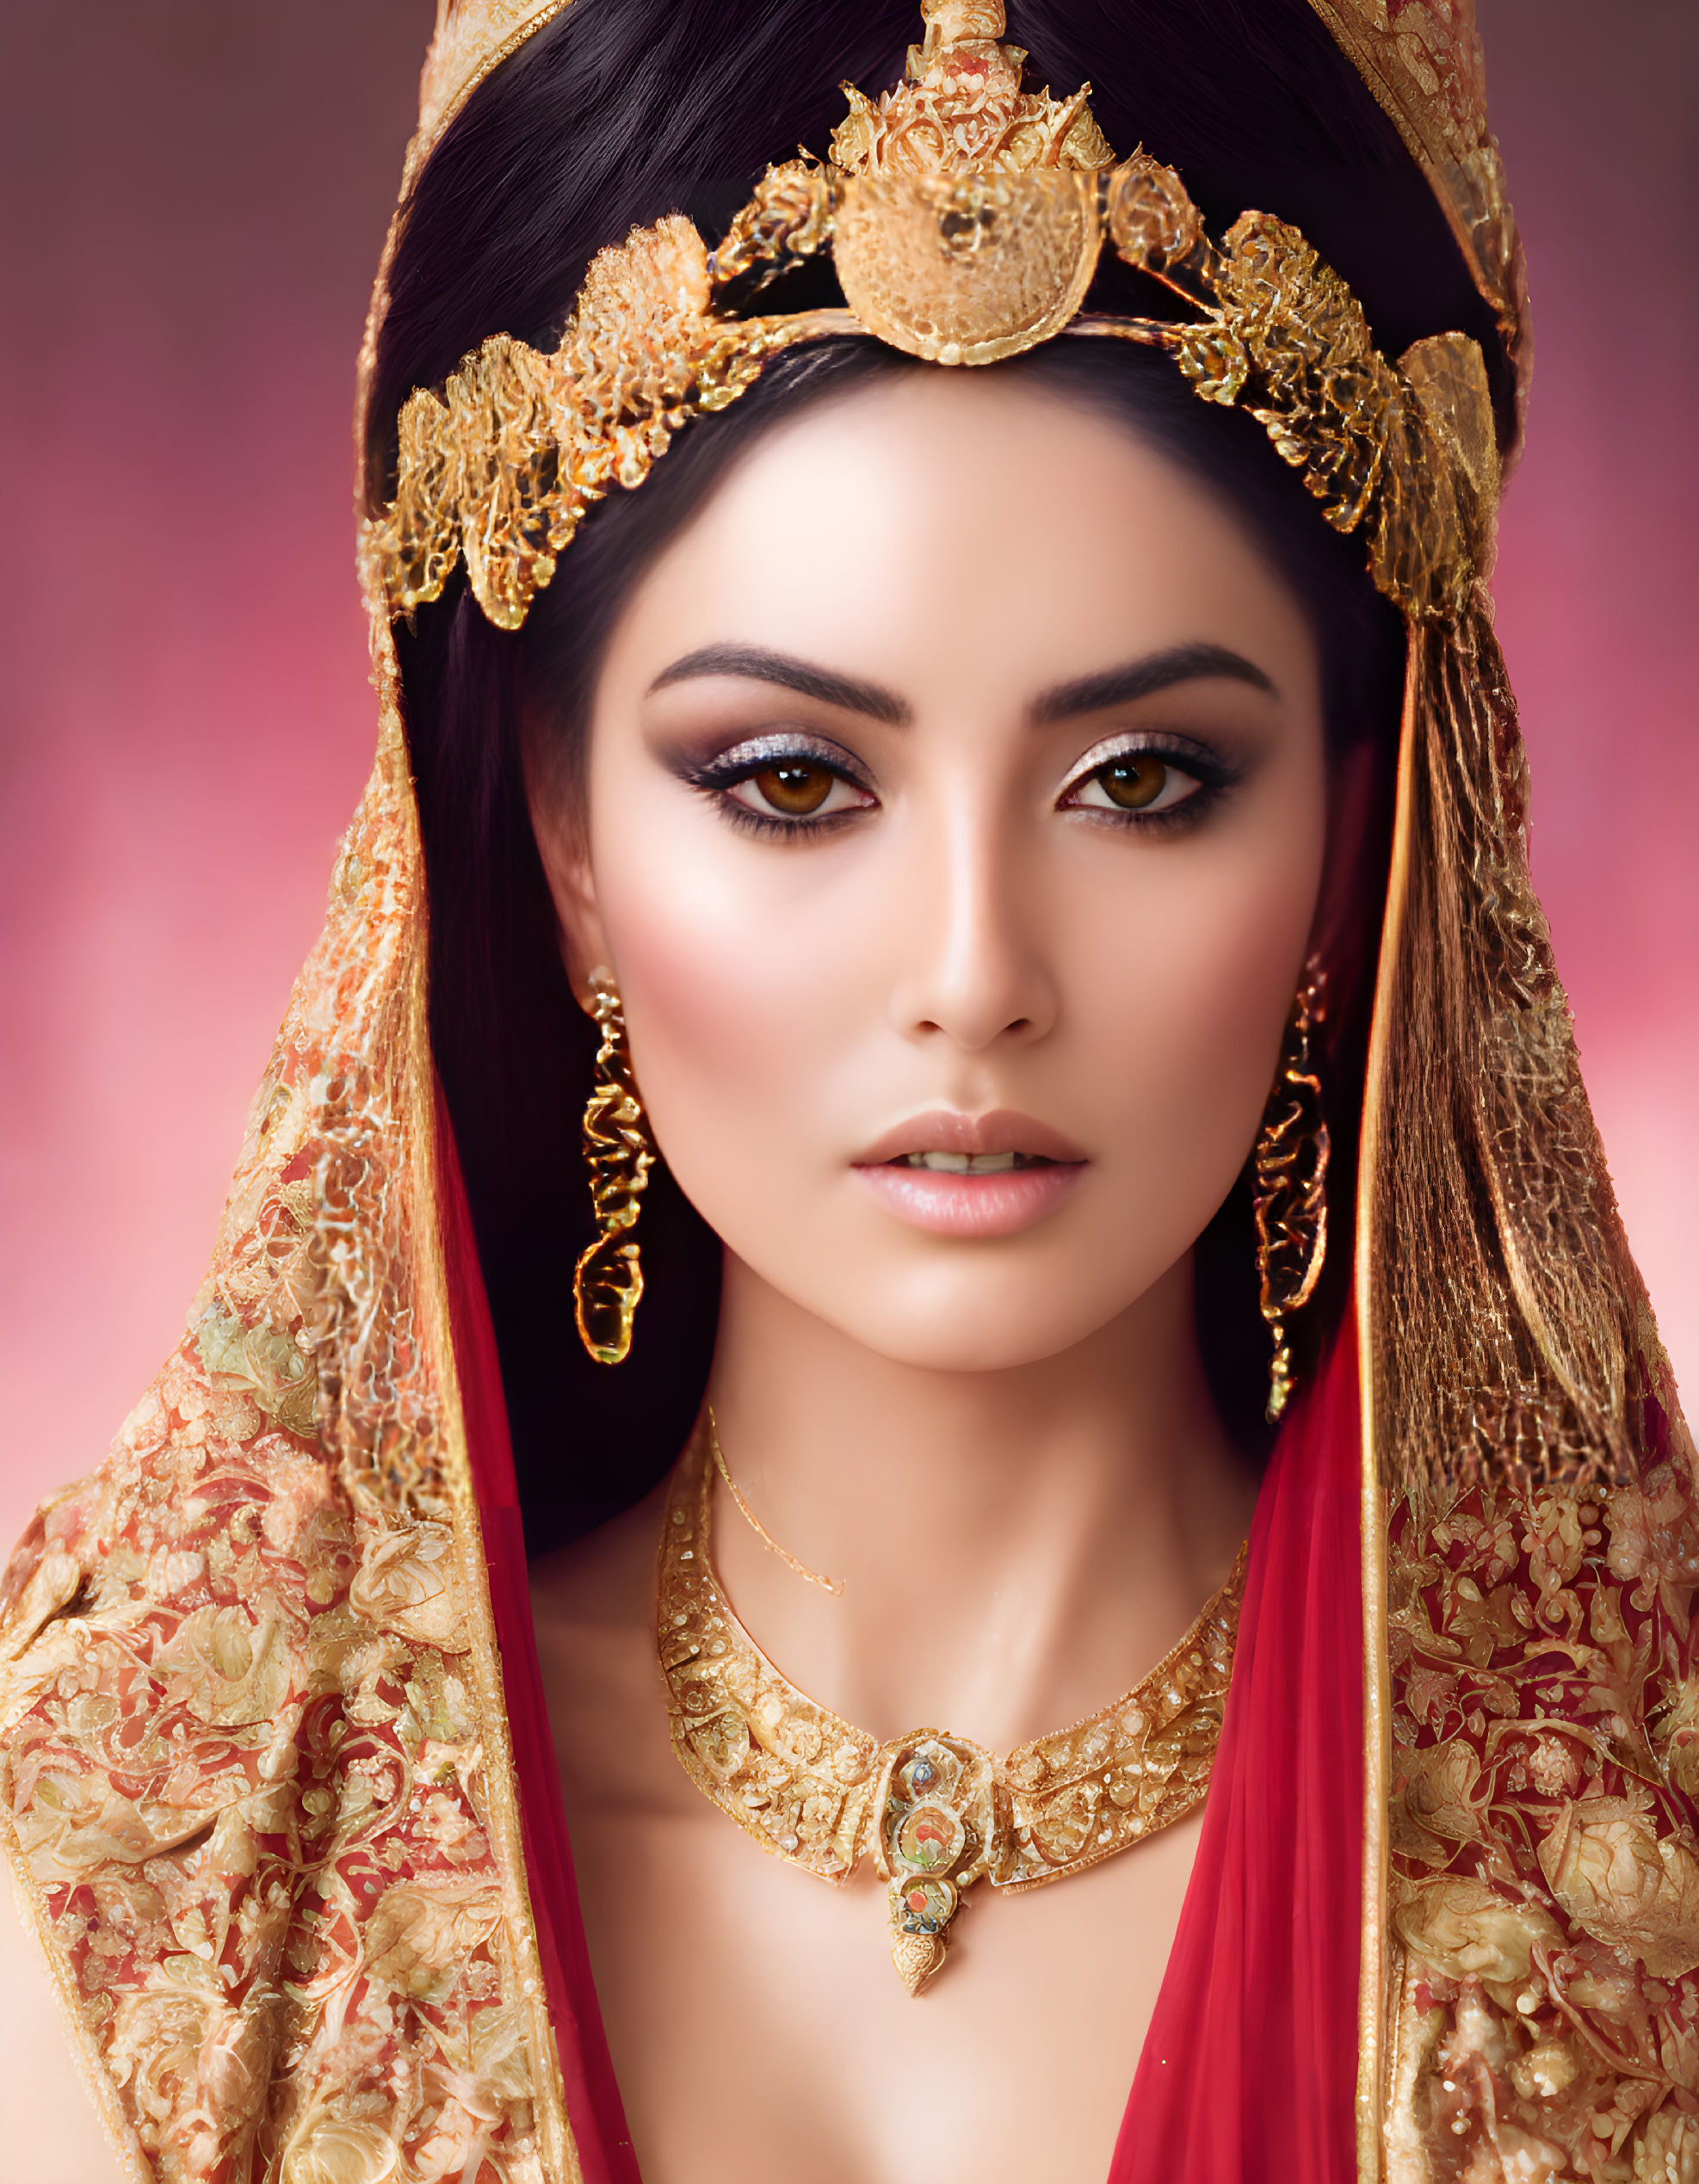 Woman in ornate golden jewelry on pink backdrop